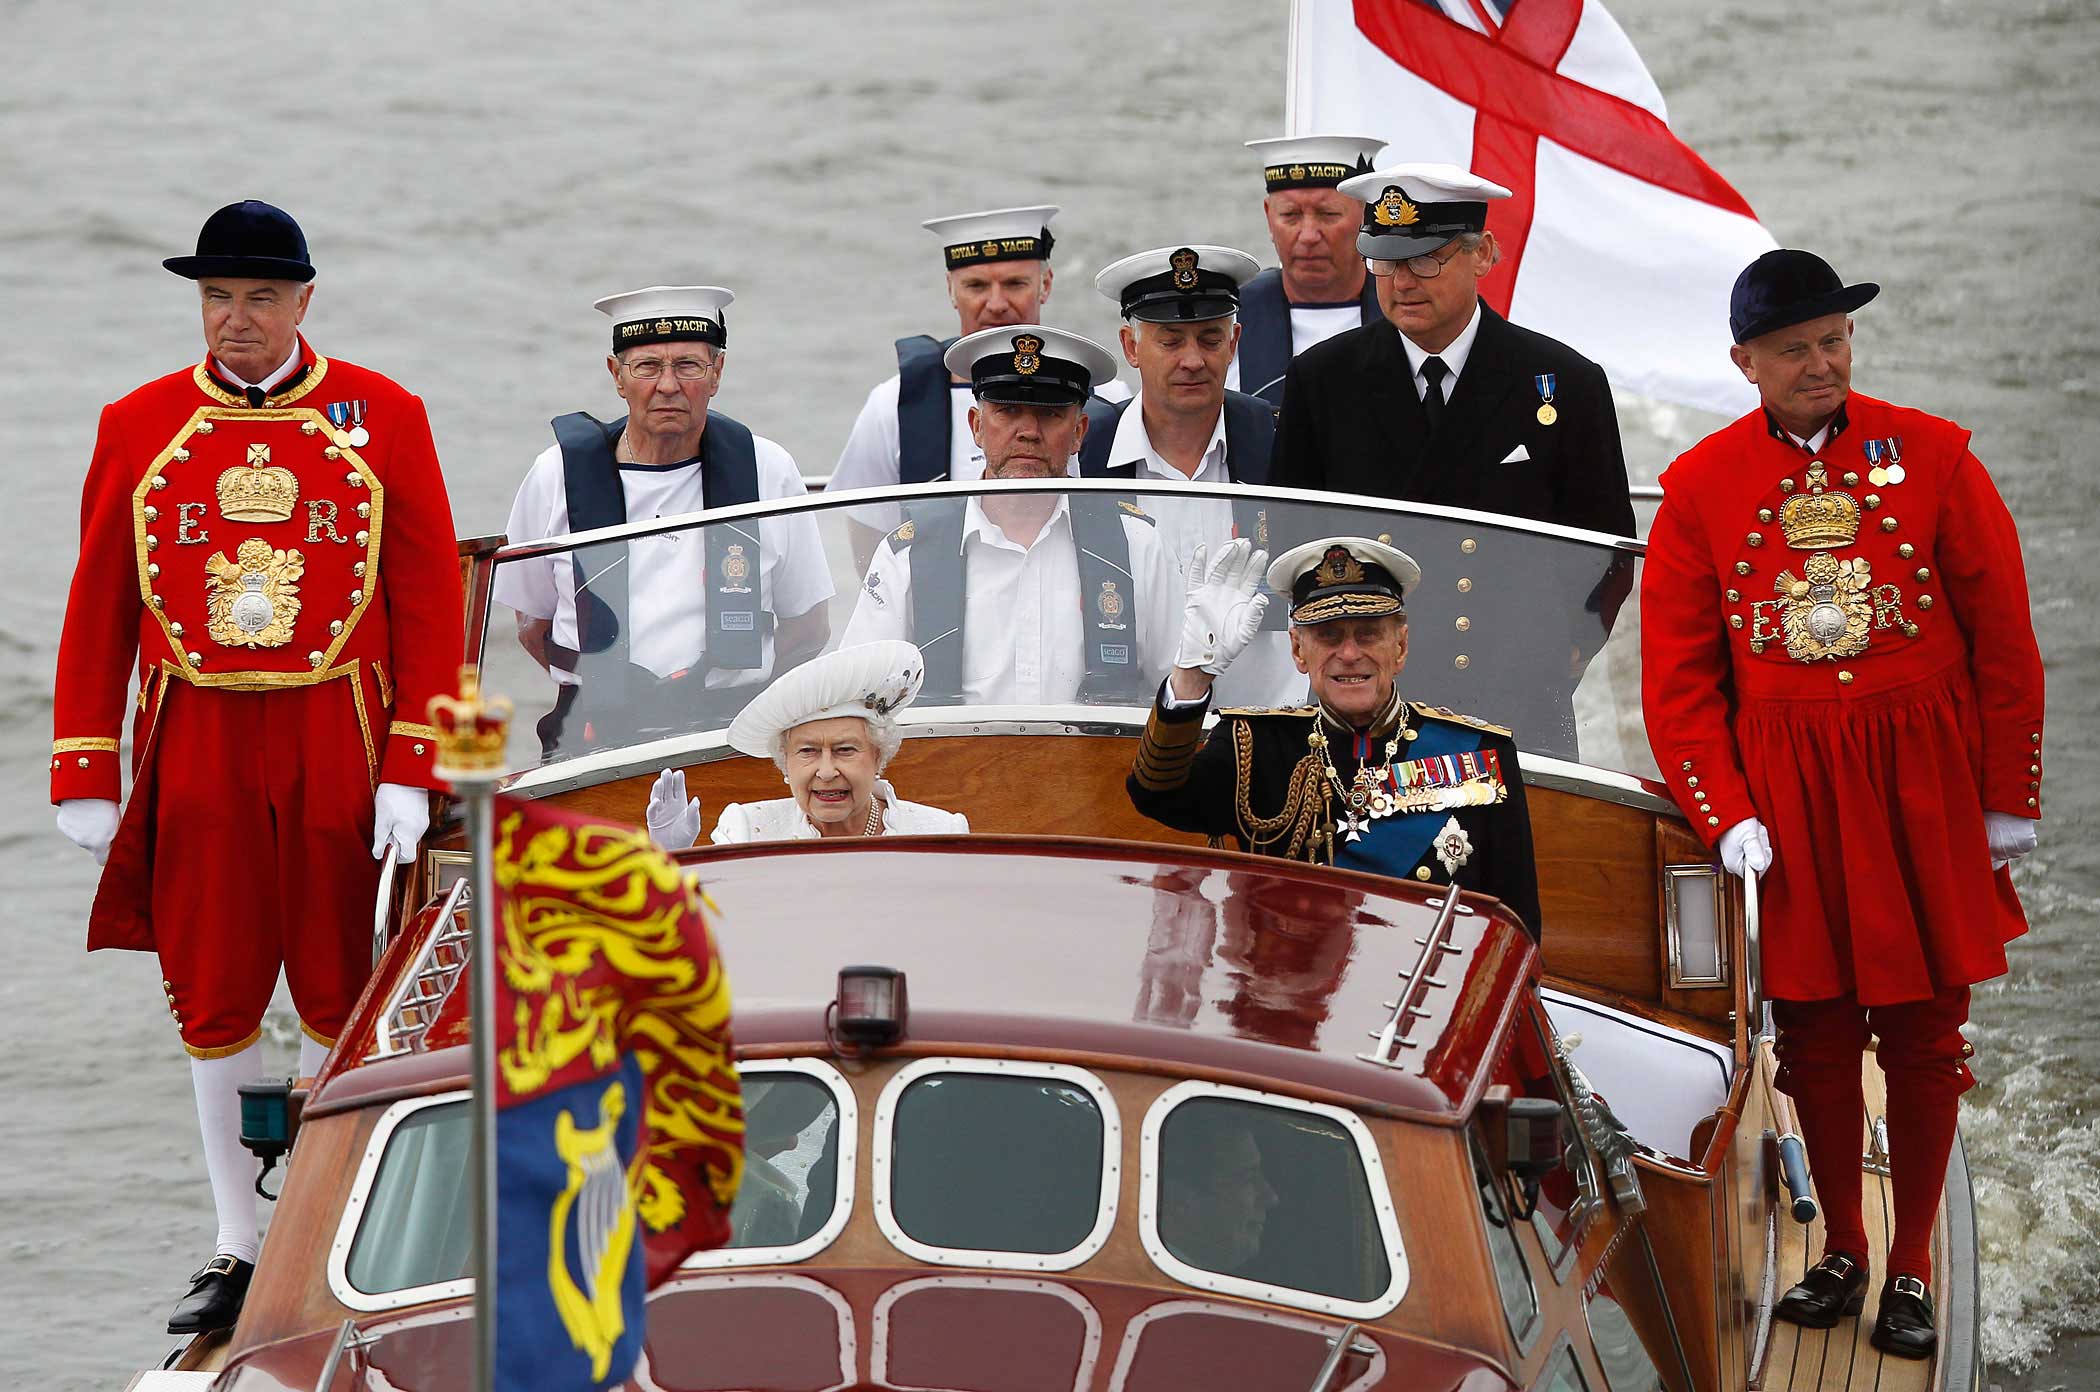 Queen Elizabeth and Prince Philip wave from a boat during a pageant in celebration of the Queen's Diamond Jubilee along the River Thames in central London on June 3, 2012.